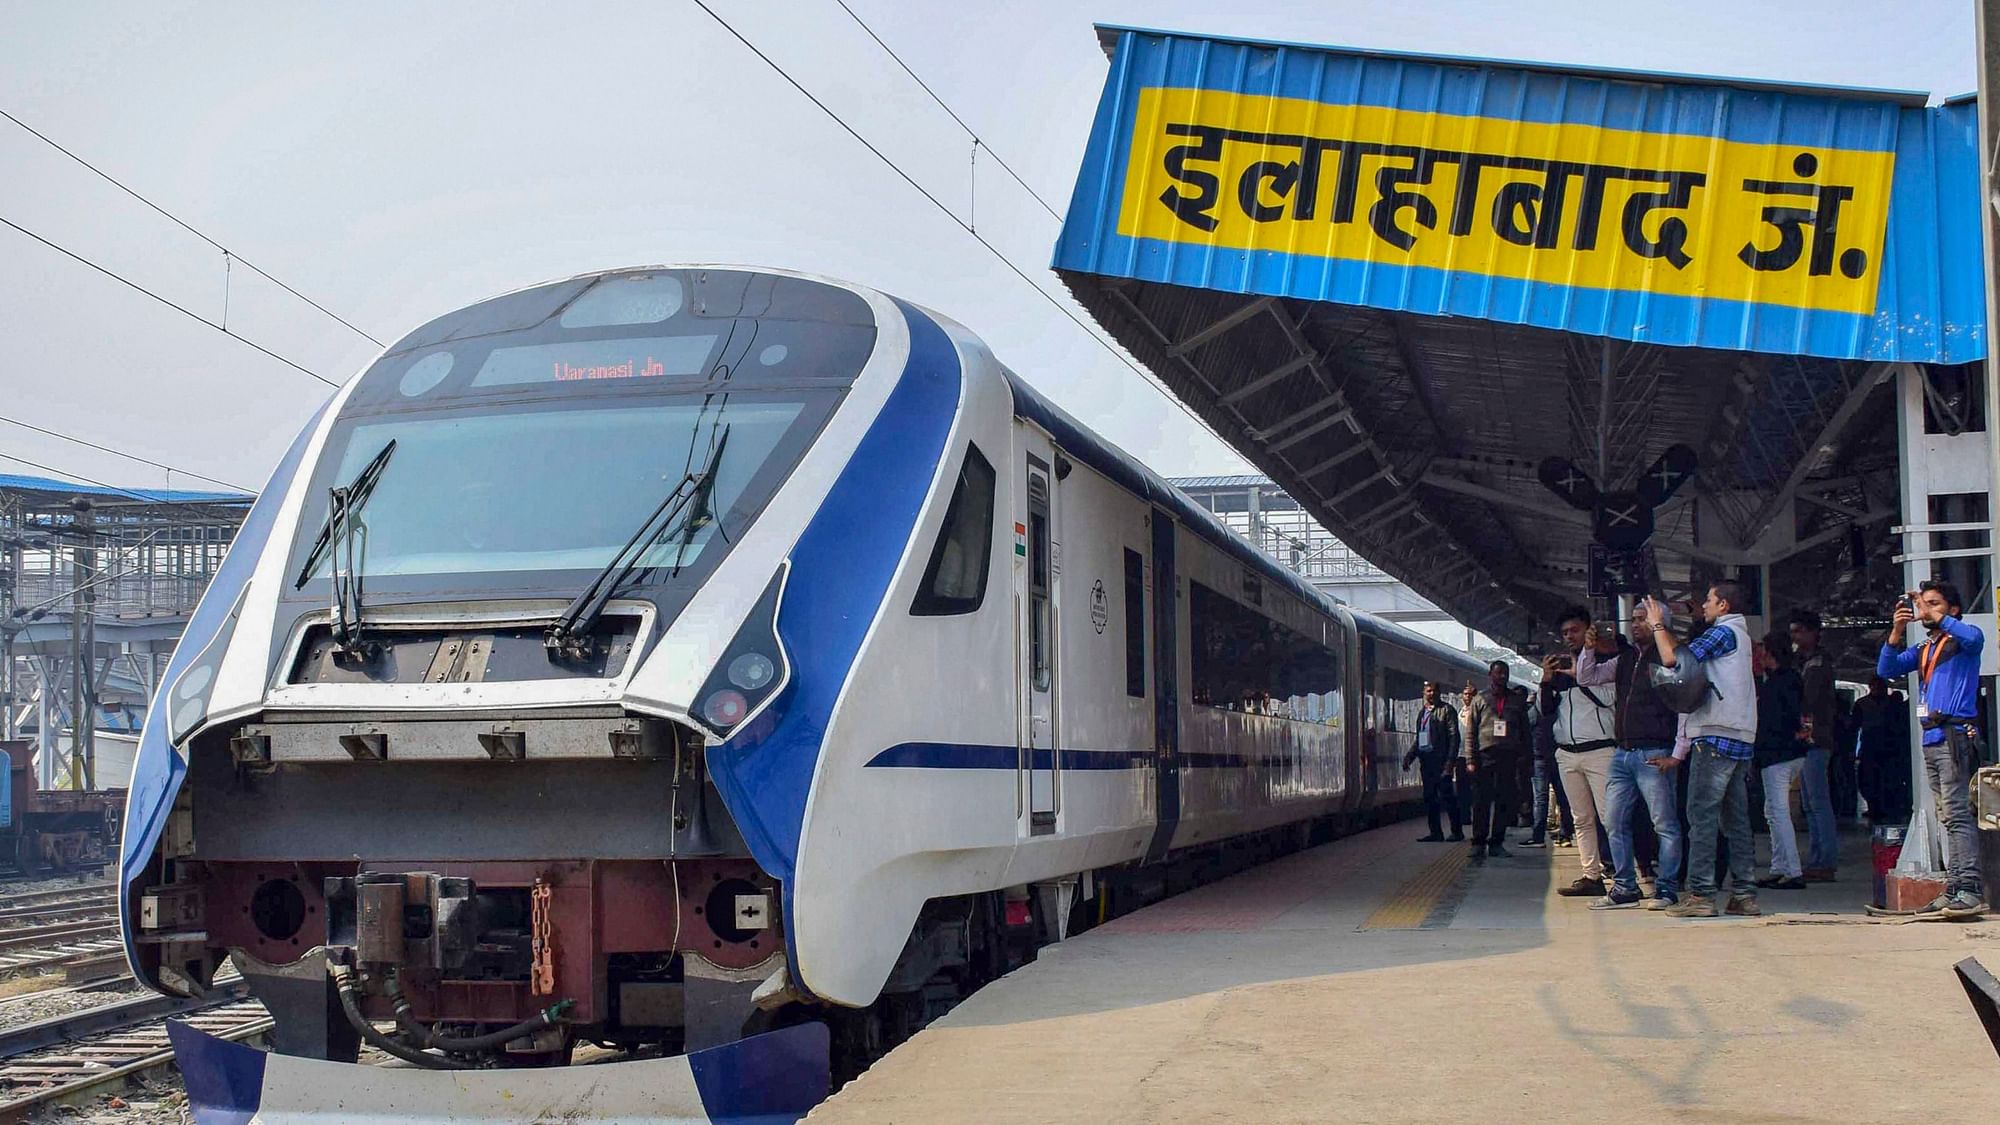  Vande Bharat Express  or Train-18, at the Allahabad Railway Junction.